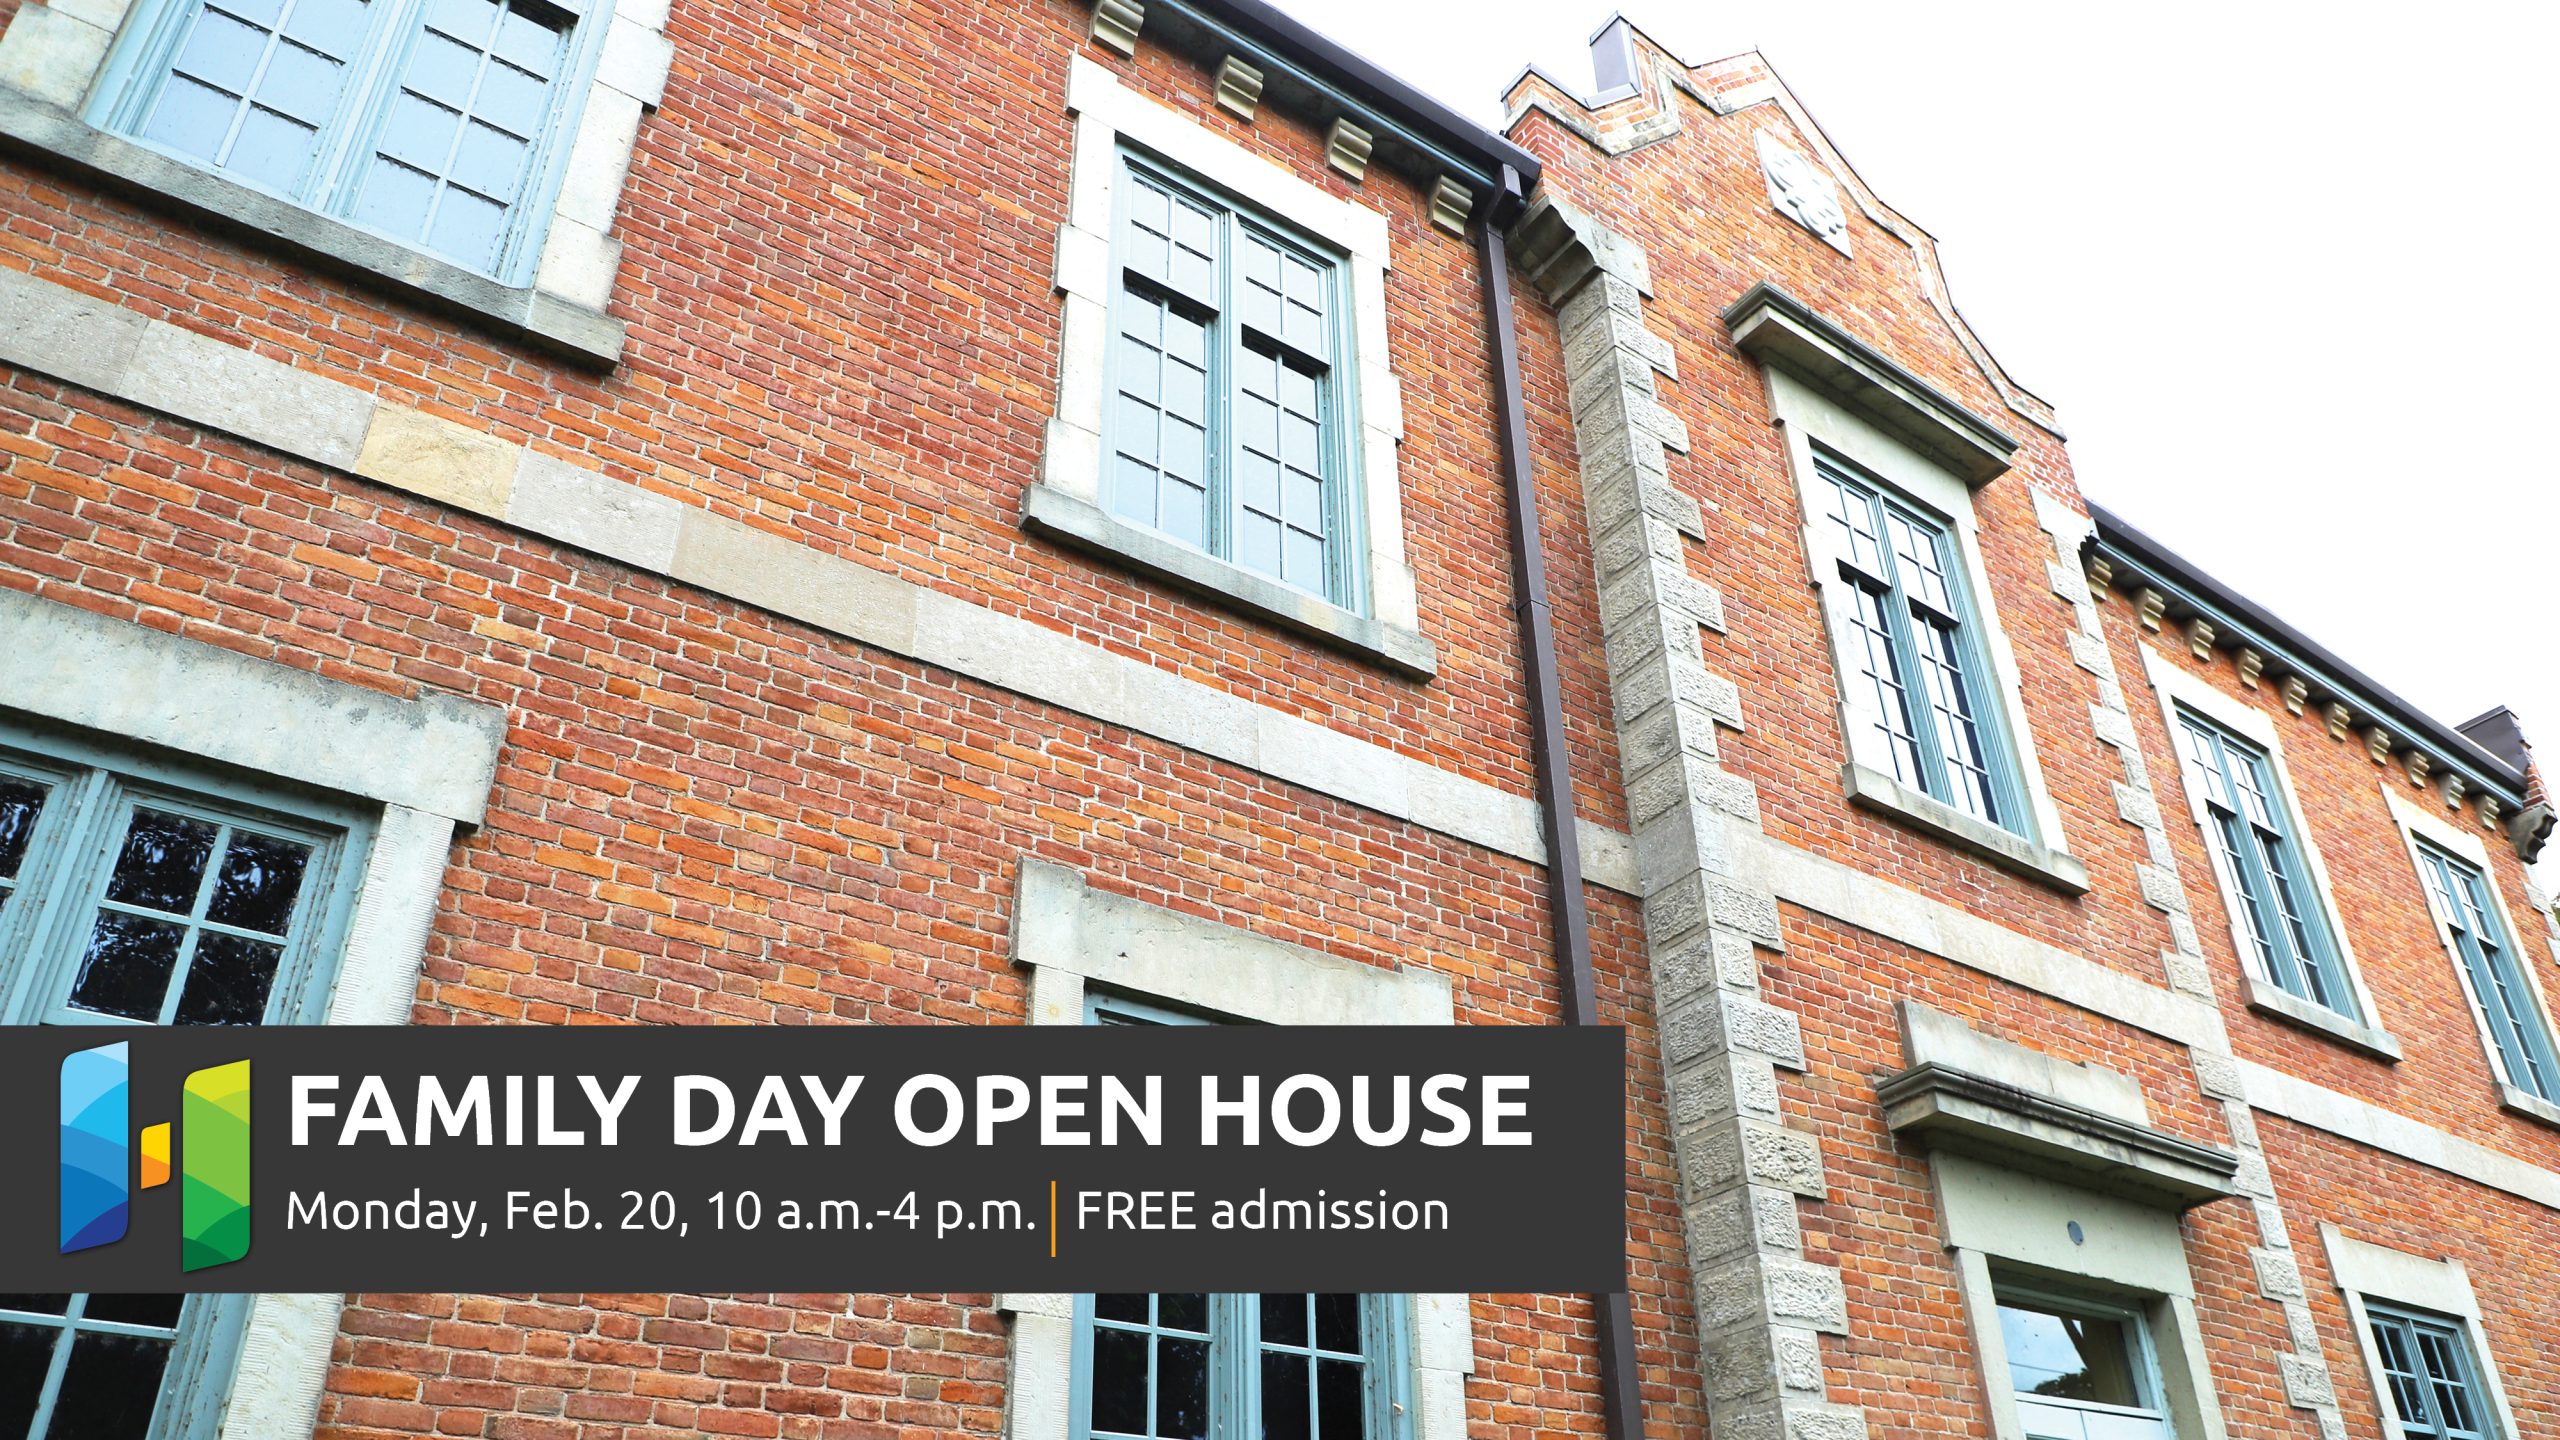 Photo of the exterior of the Huron County Museum with text promoting Family Day Open House